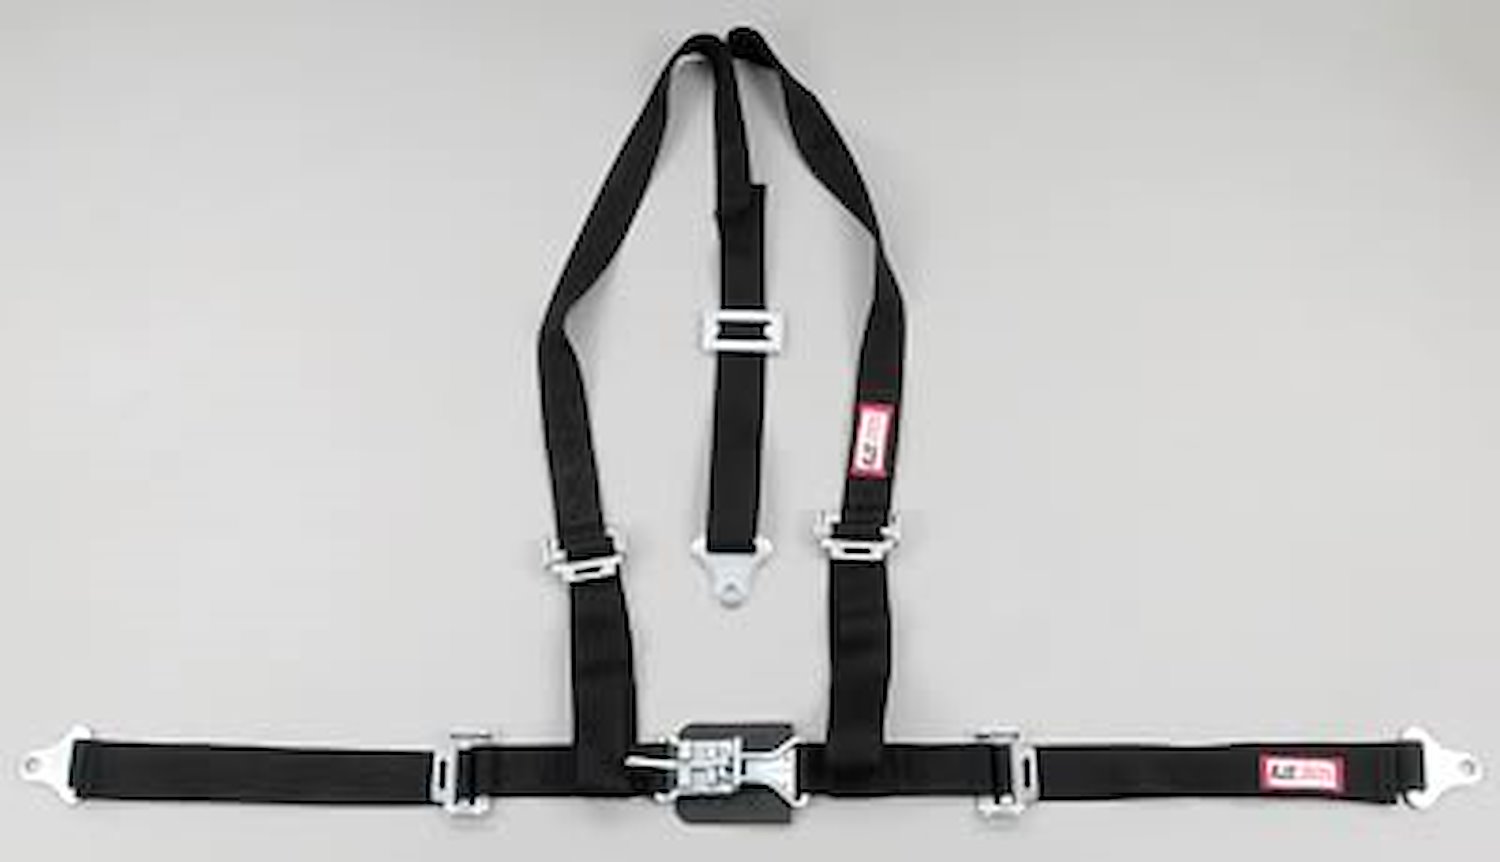 NON-SFI L&L HARNESS 3 PULL UP Lap Belt SEWN IN 2 S.H. Individual FLOOR Mount w/STERNUM STRAP ALL WRAP ENDS RED